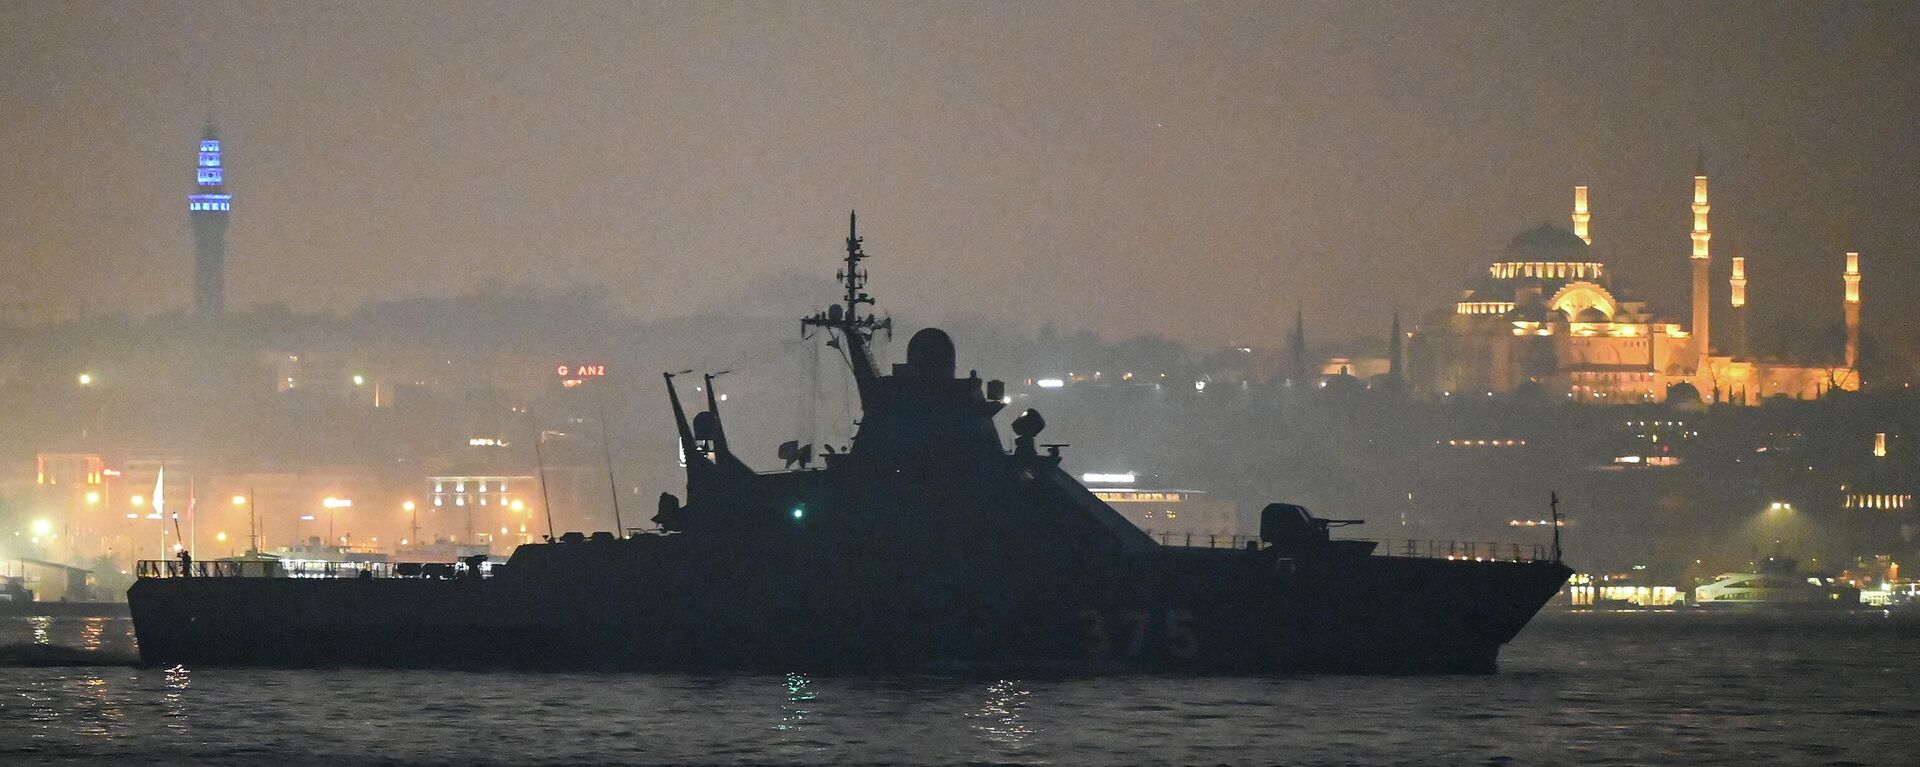 Russian Navy's Project 22160 Patrol Vessel Dmitriy Rogachev 375 sails through the Bosphorus Strait on the way to the Black Sea past the city Istanbul as Suleymaniye mosque is seen in the backround on February 16, 2022. - Sputnik International, 1920, 10.04.2022